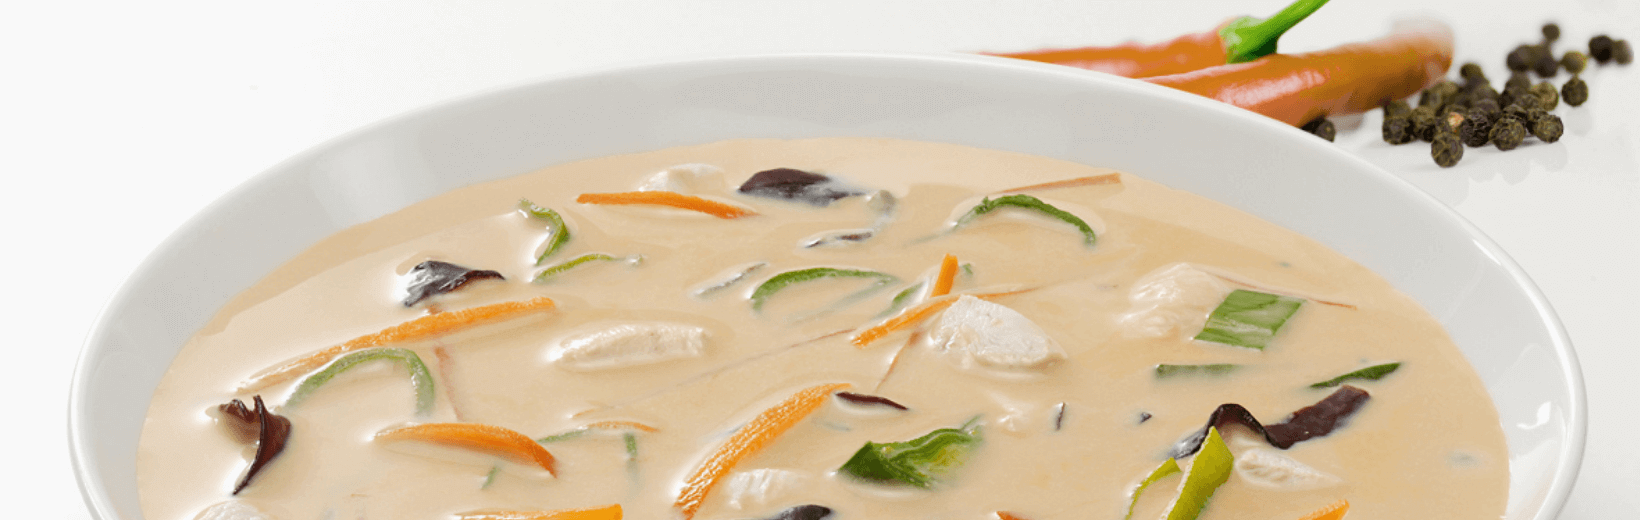 Cocos-Curry-Suppe